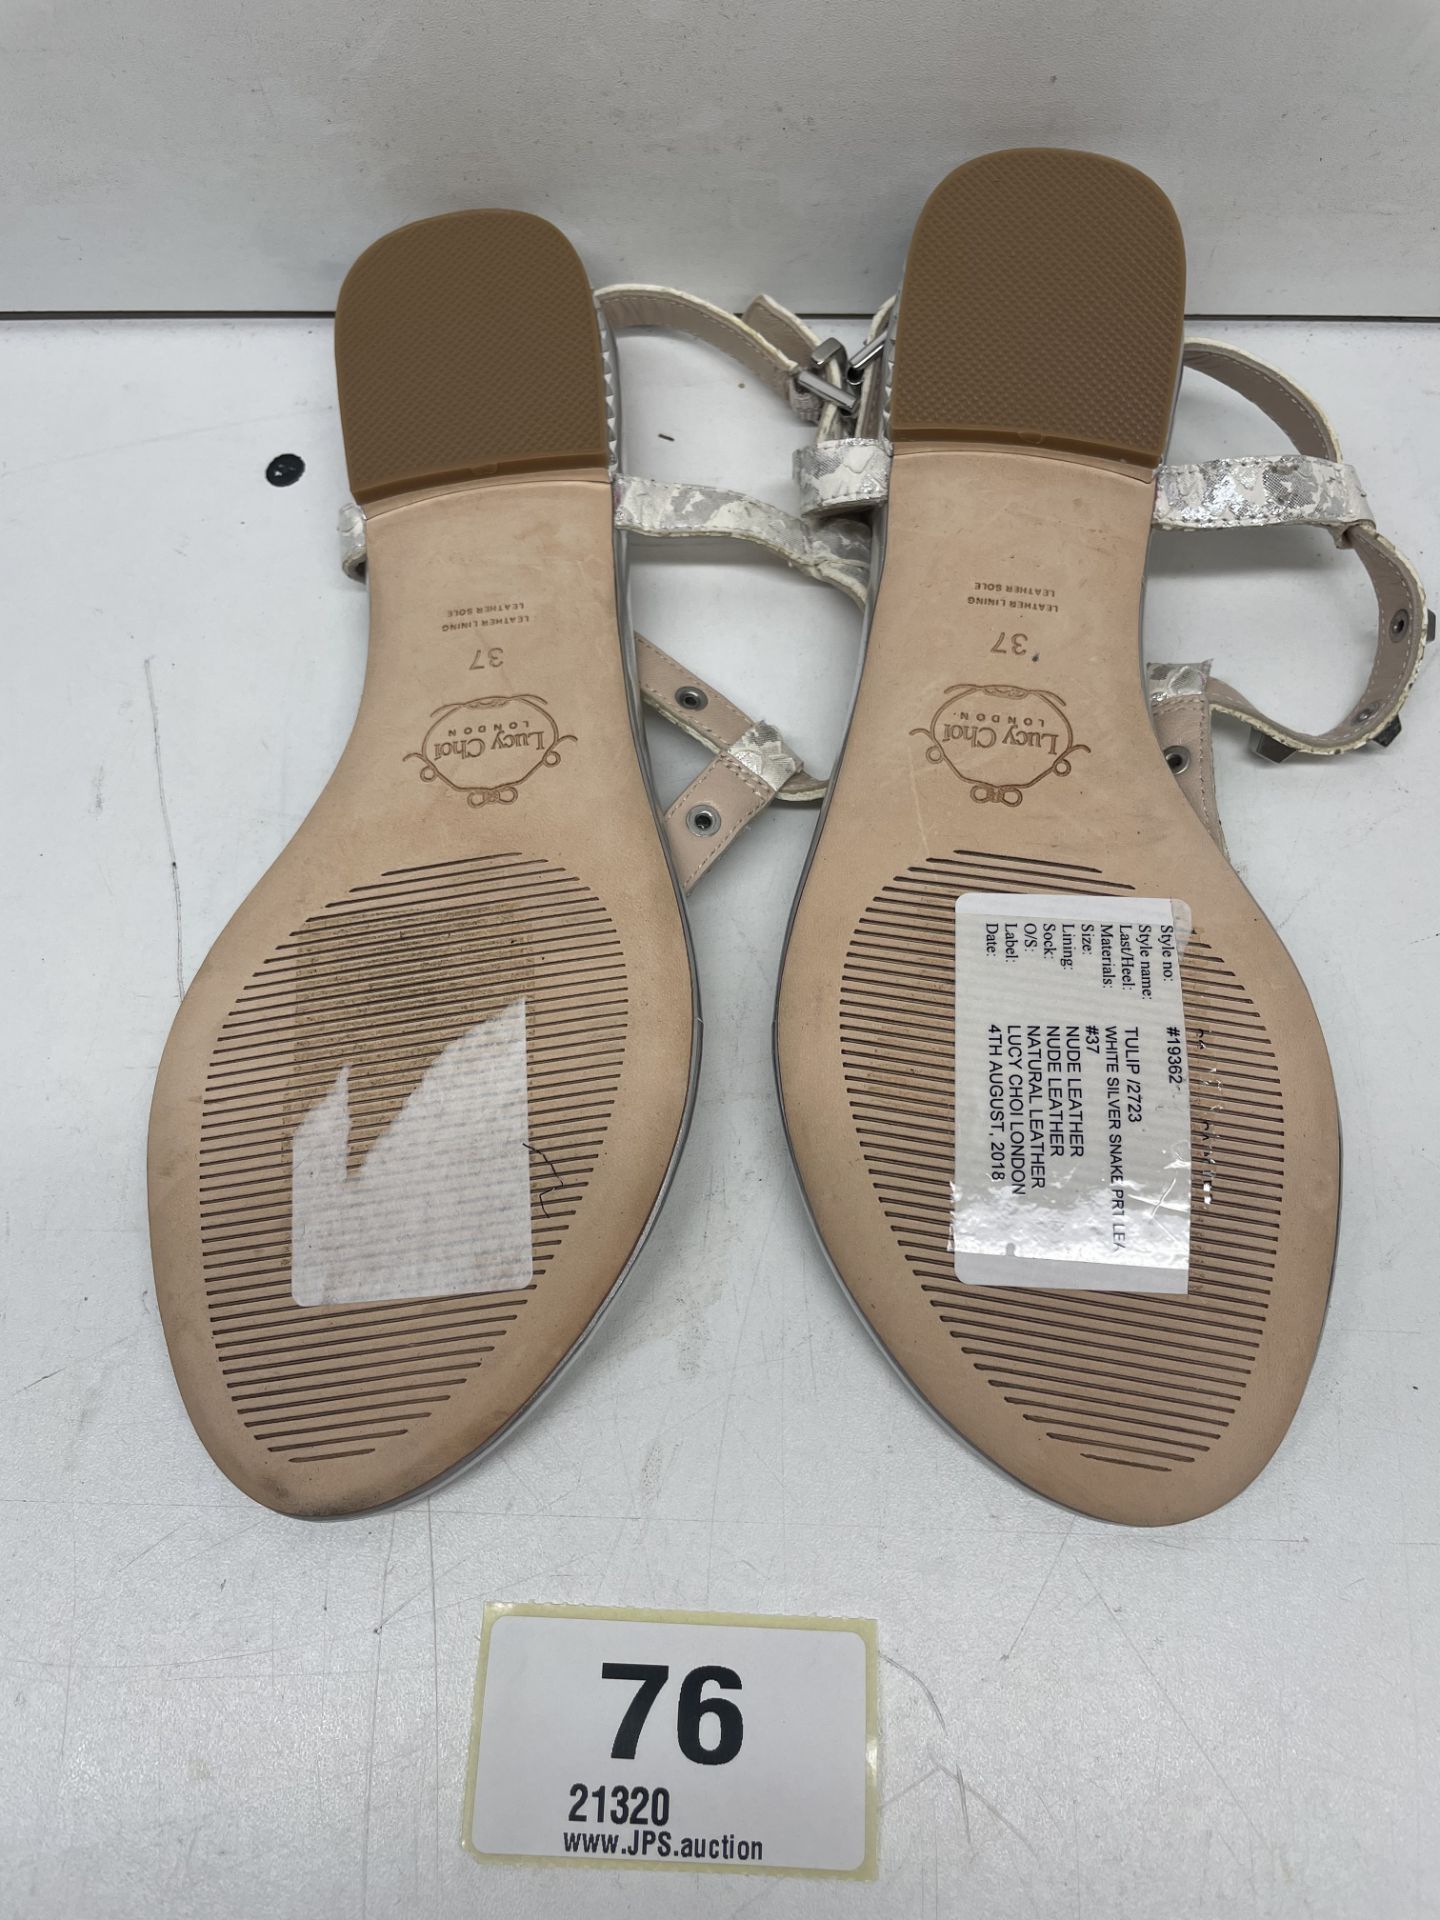 Ex-Display Lucy Choi Flat Sandals | Eur 37 - Image 2 of 2